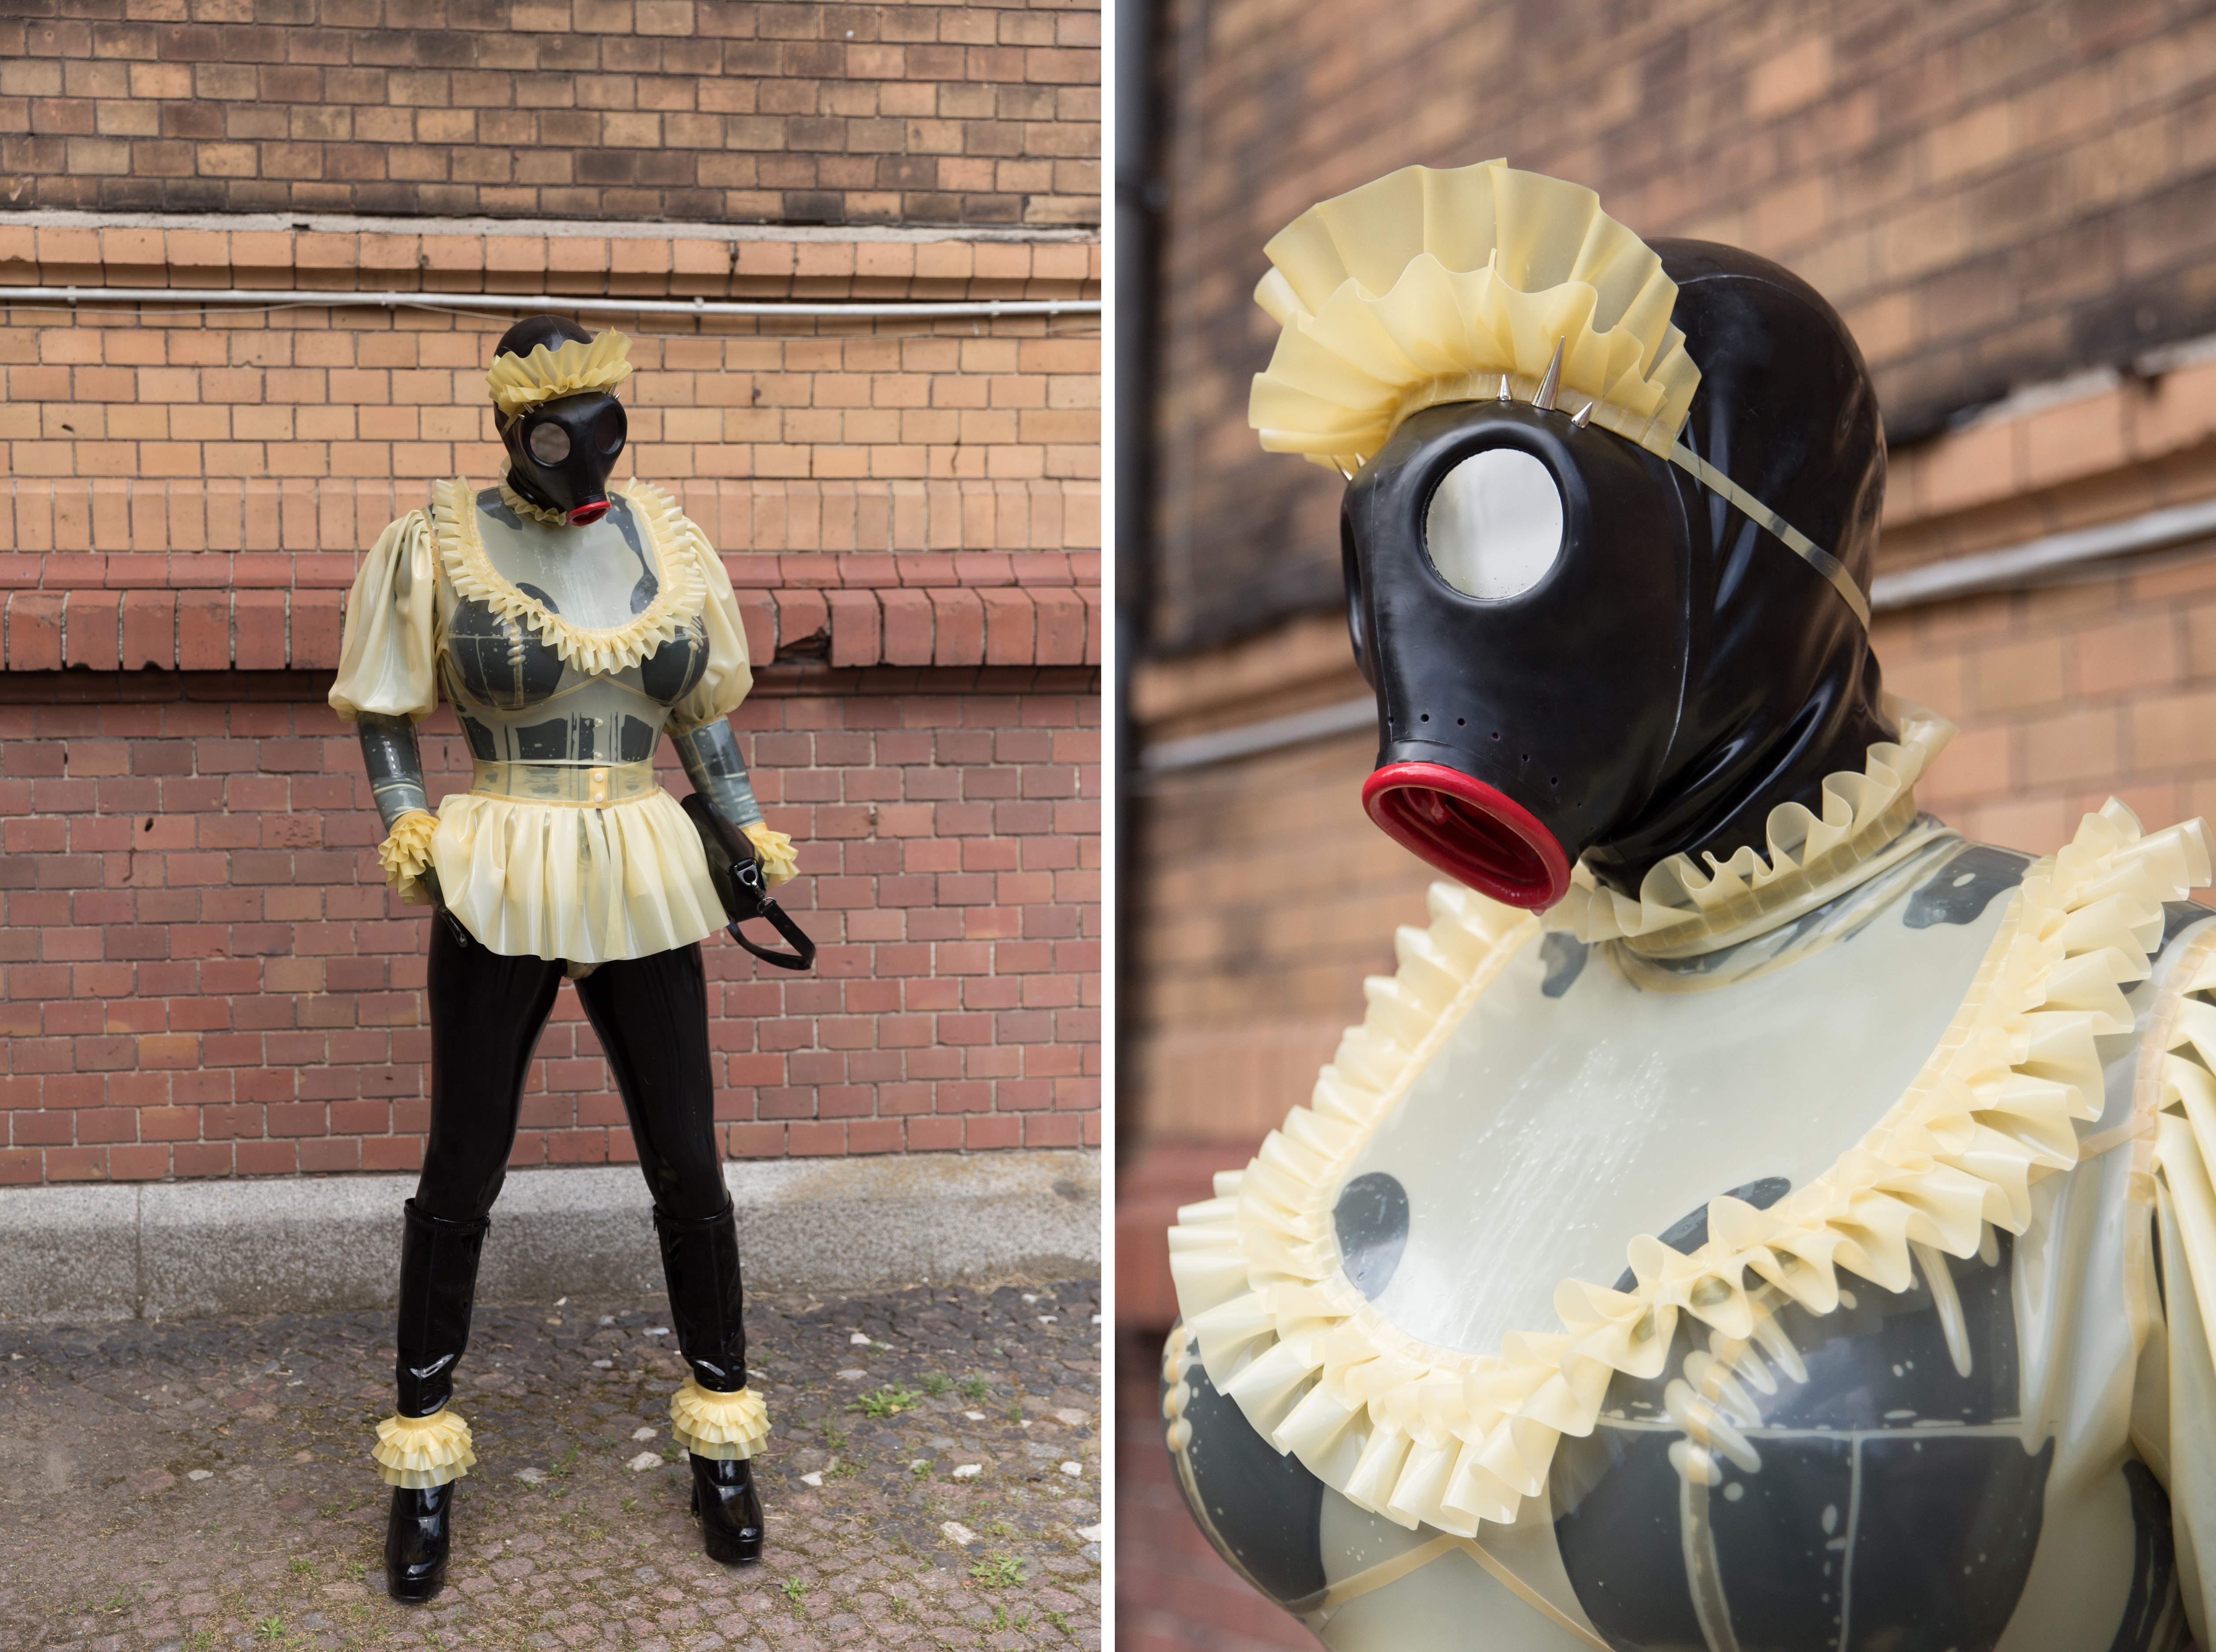 Gummipuppe - We Spent a Day with a 'Human Rubber Doll' - VICE